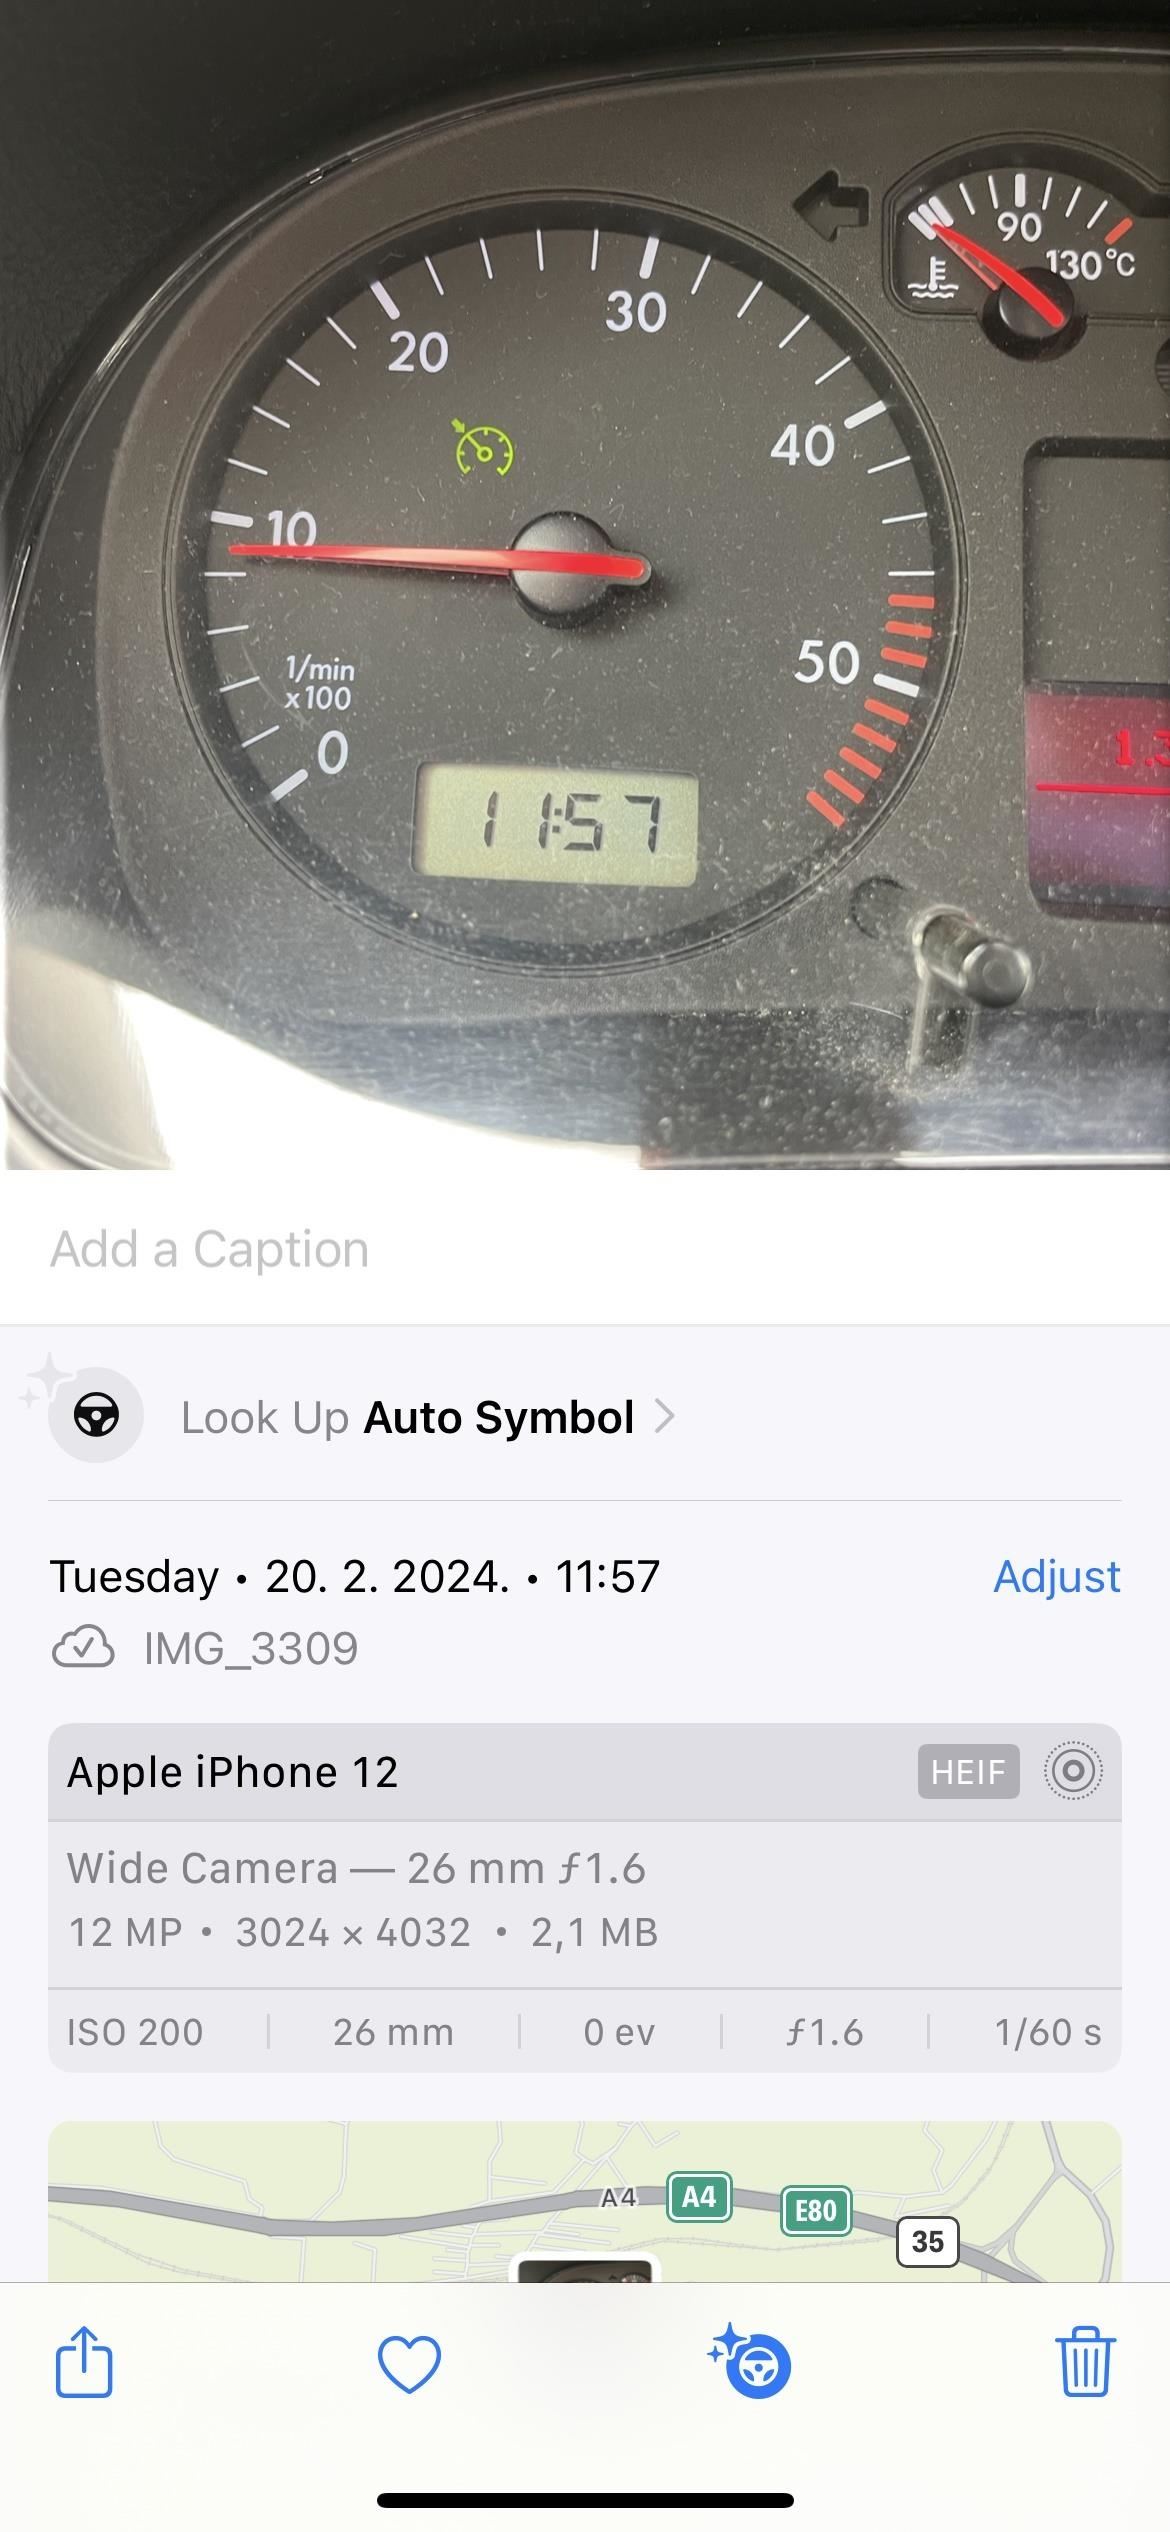 Use Your iPhone's Built-in Image Analyzer to Reveal the Hidden Meaning Behind Symbols, Signs, and More